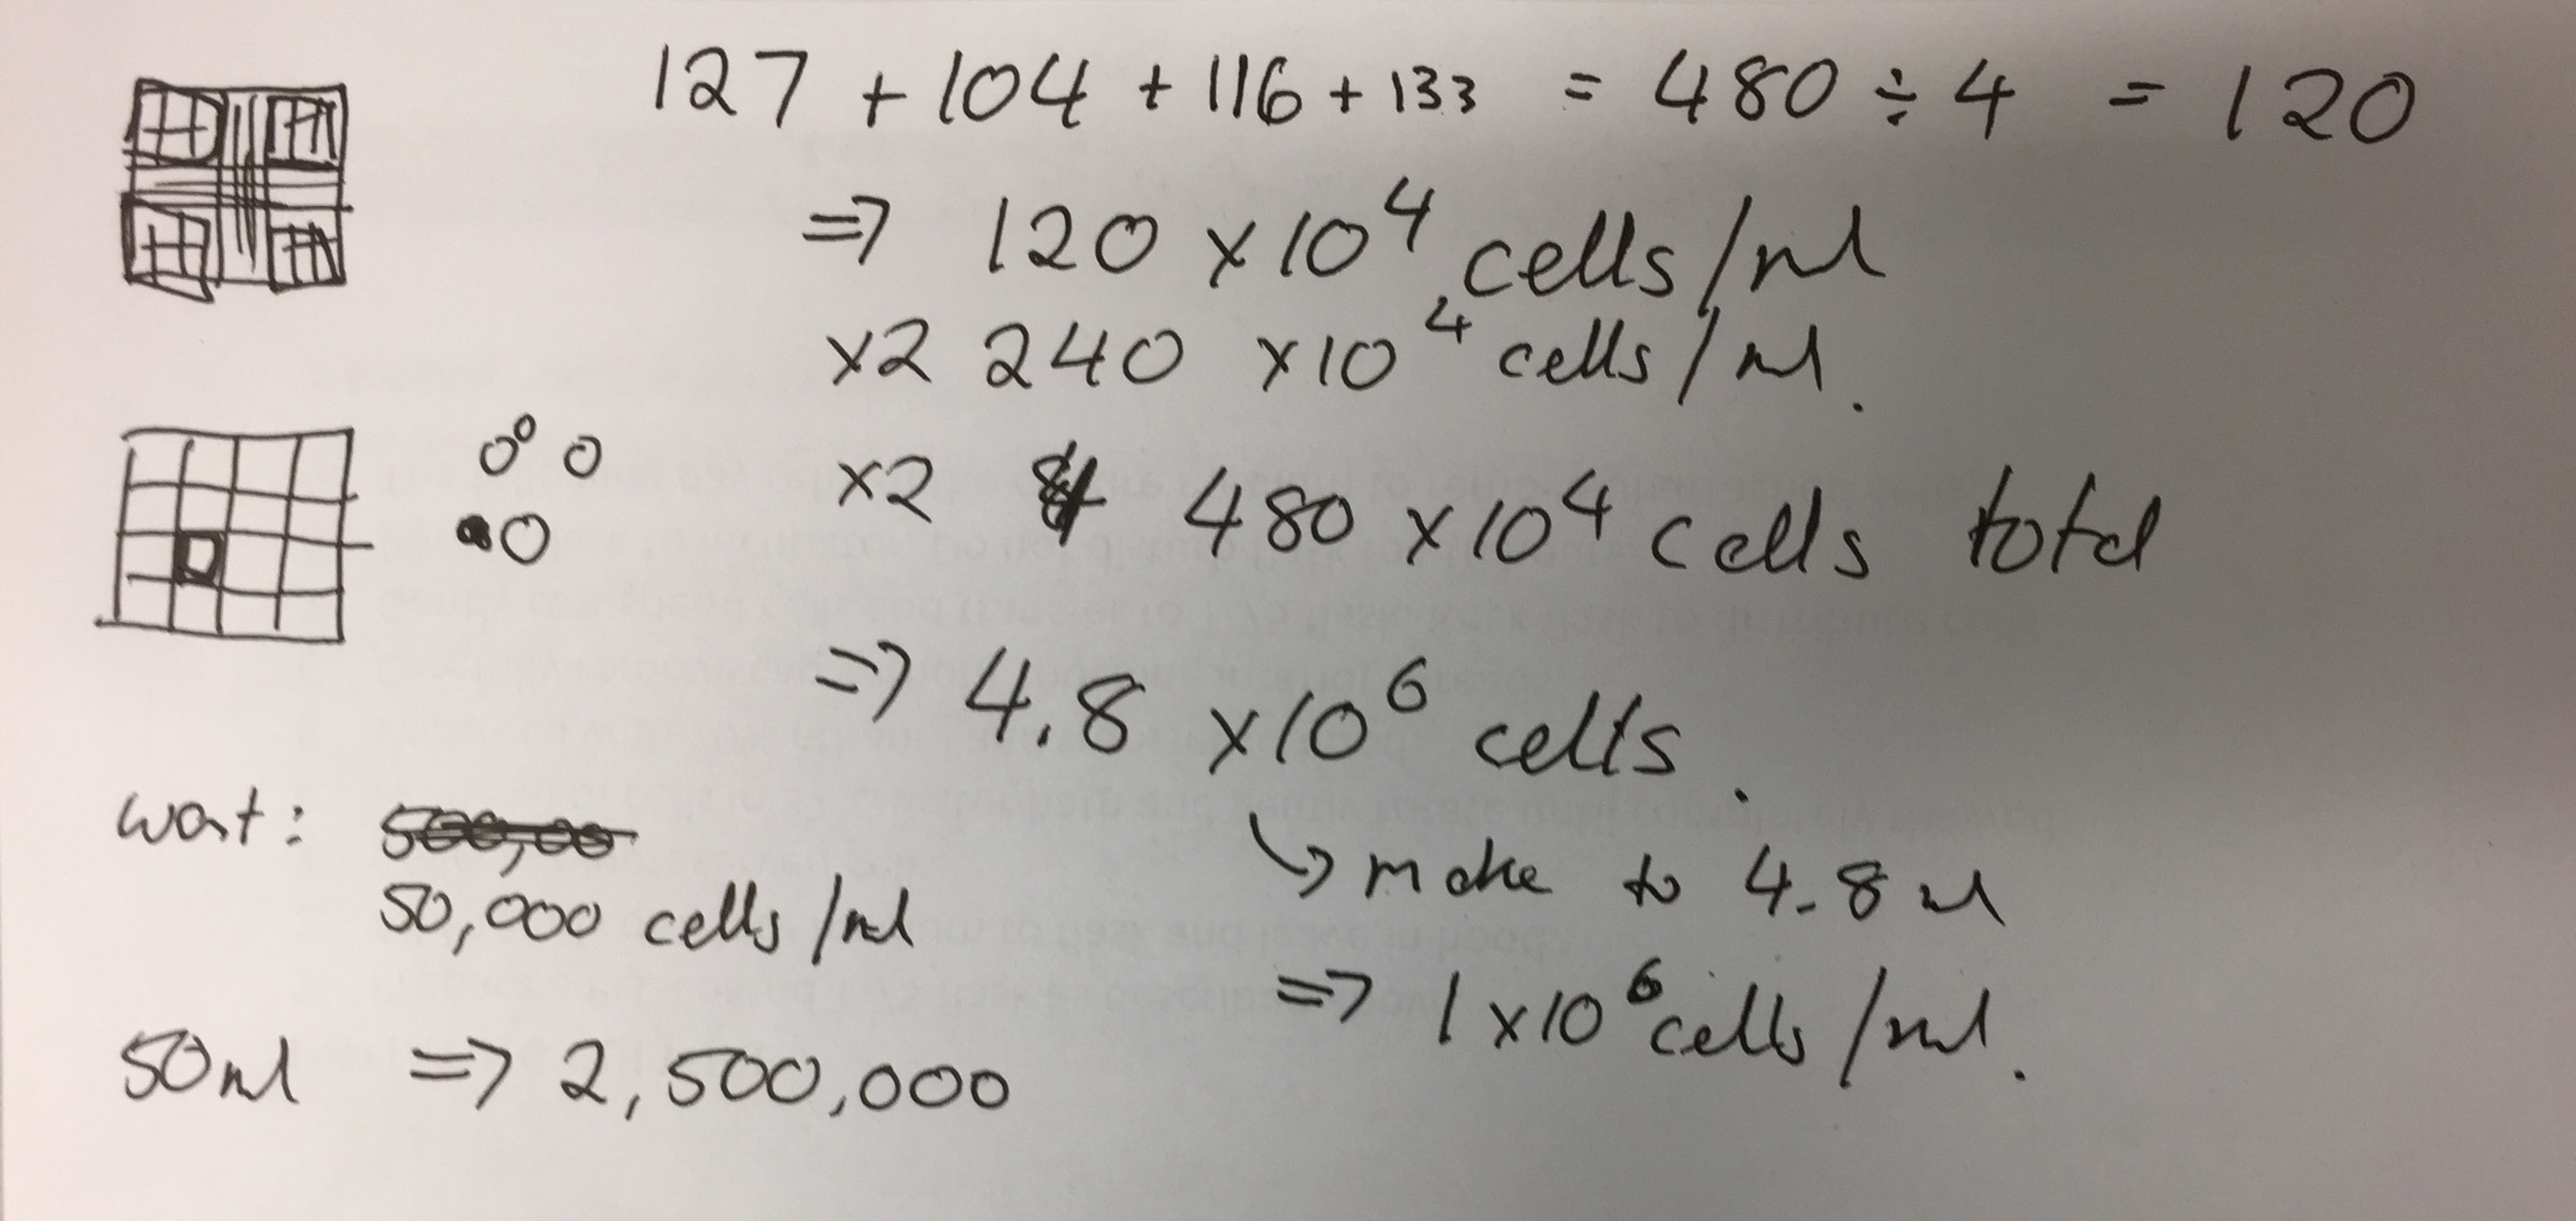 Cell Counting